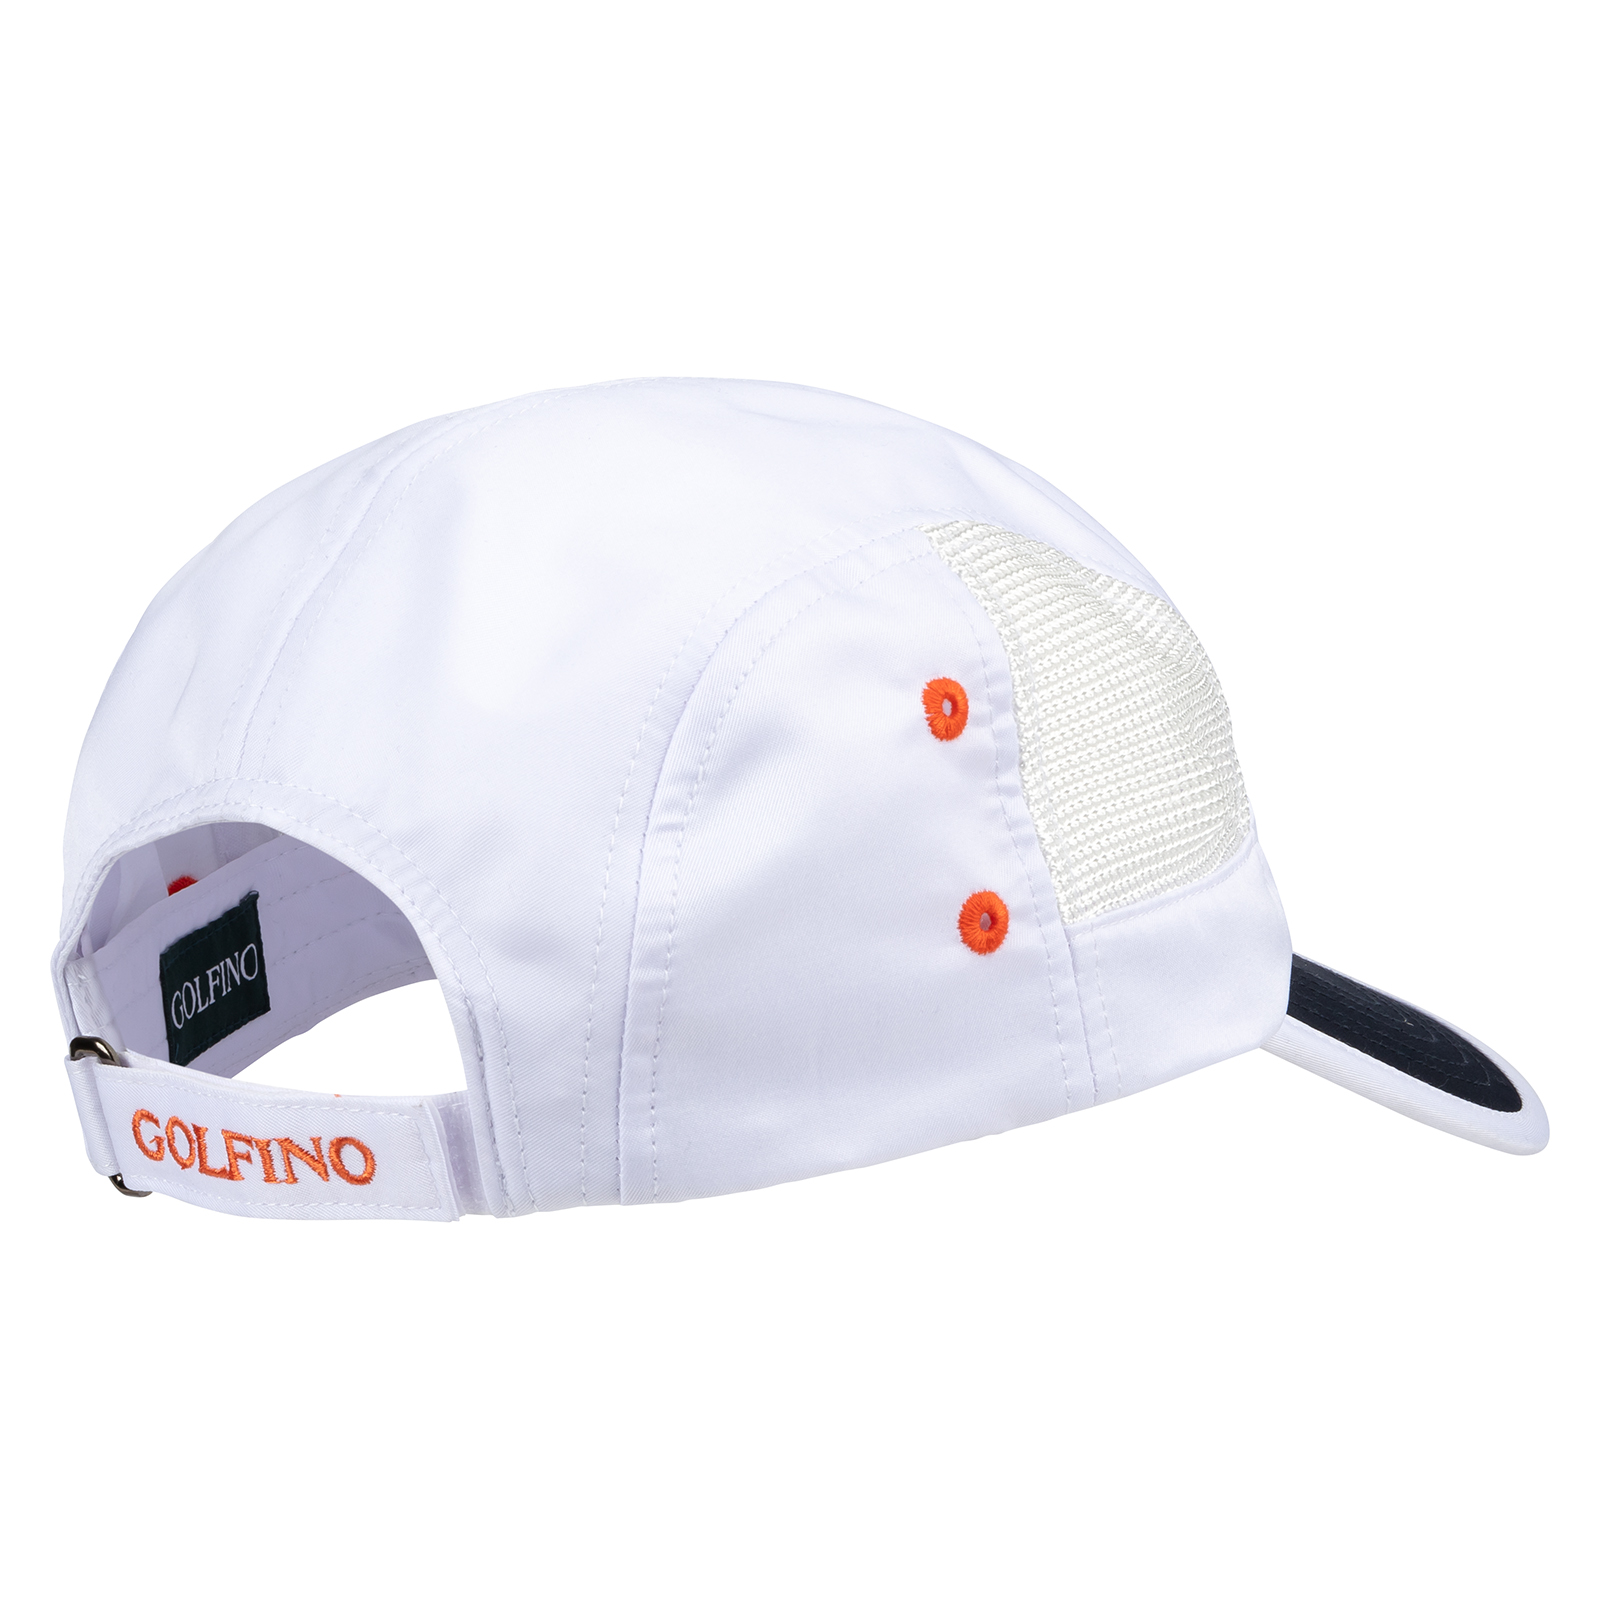 Men's golf baseball cap with contrasting elements